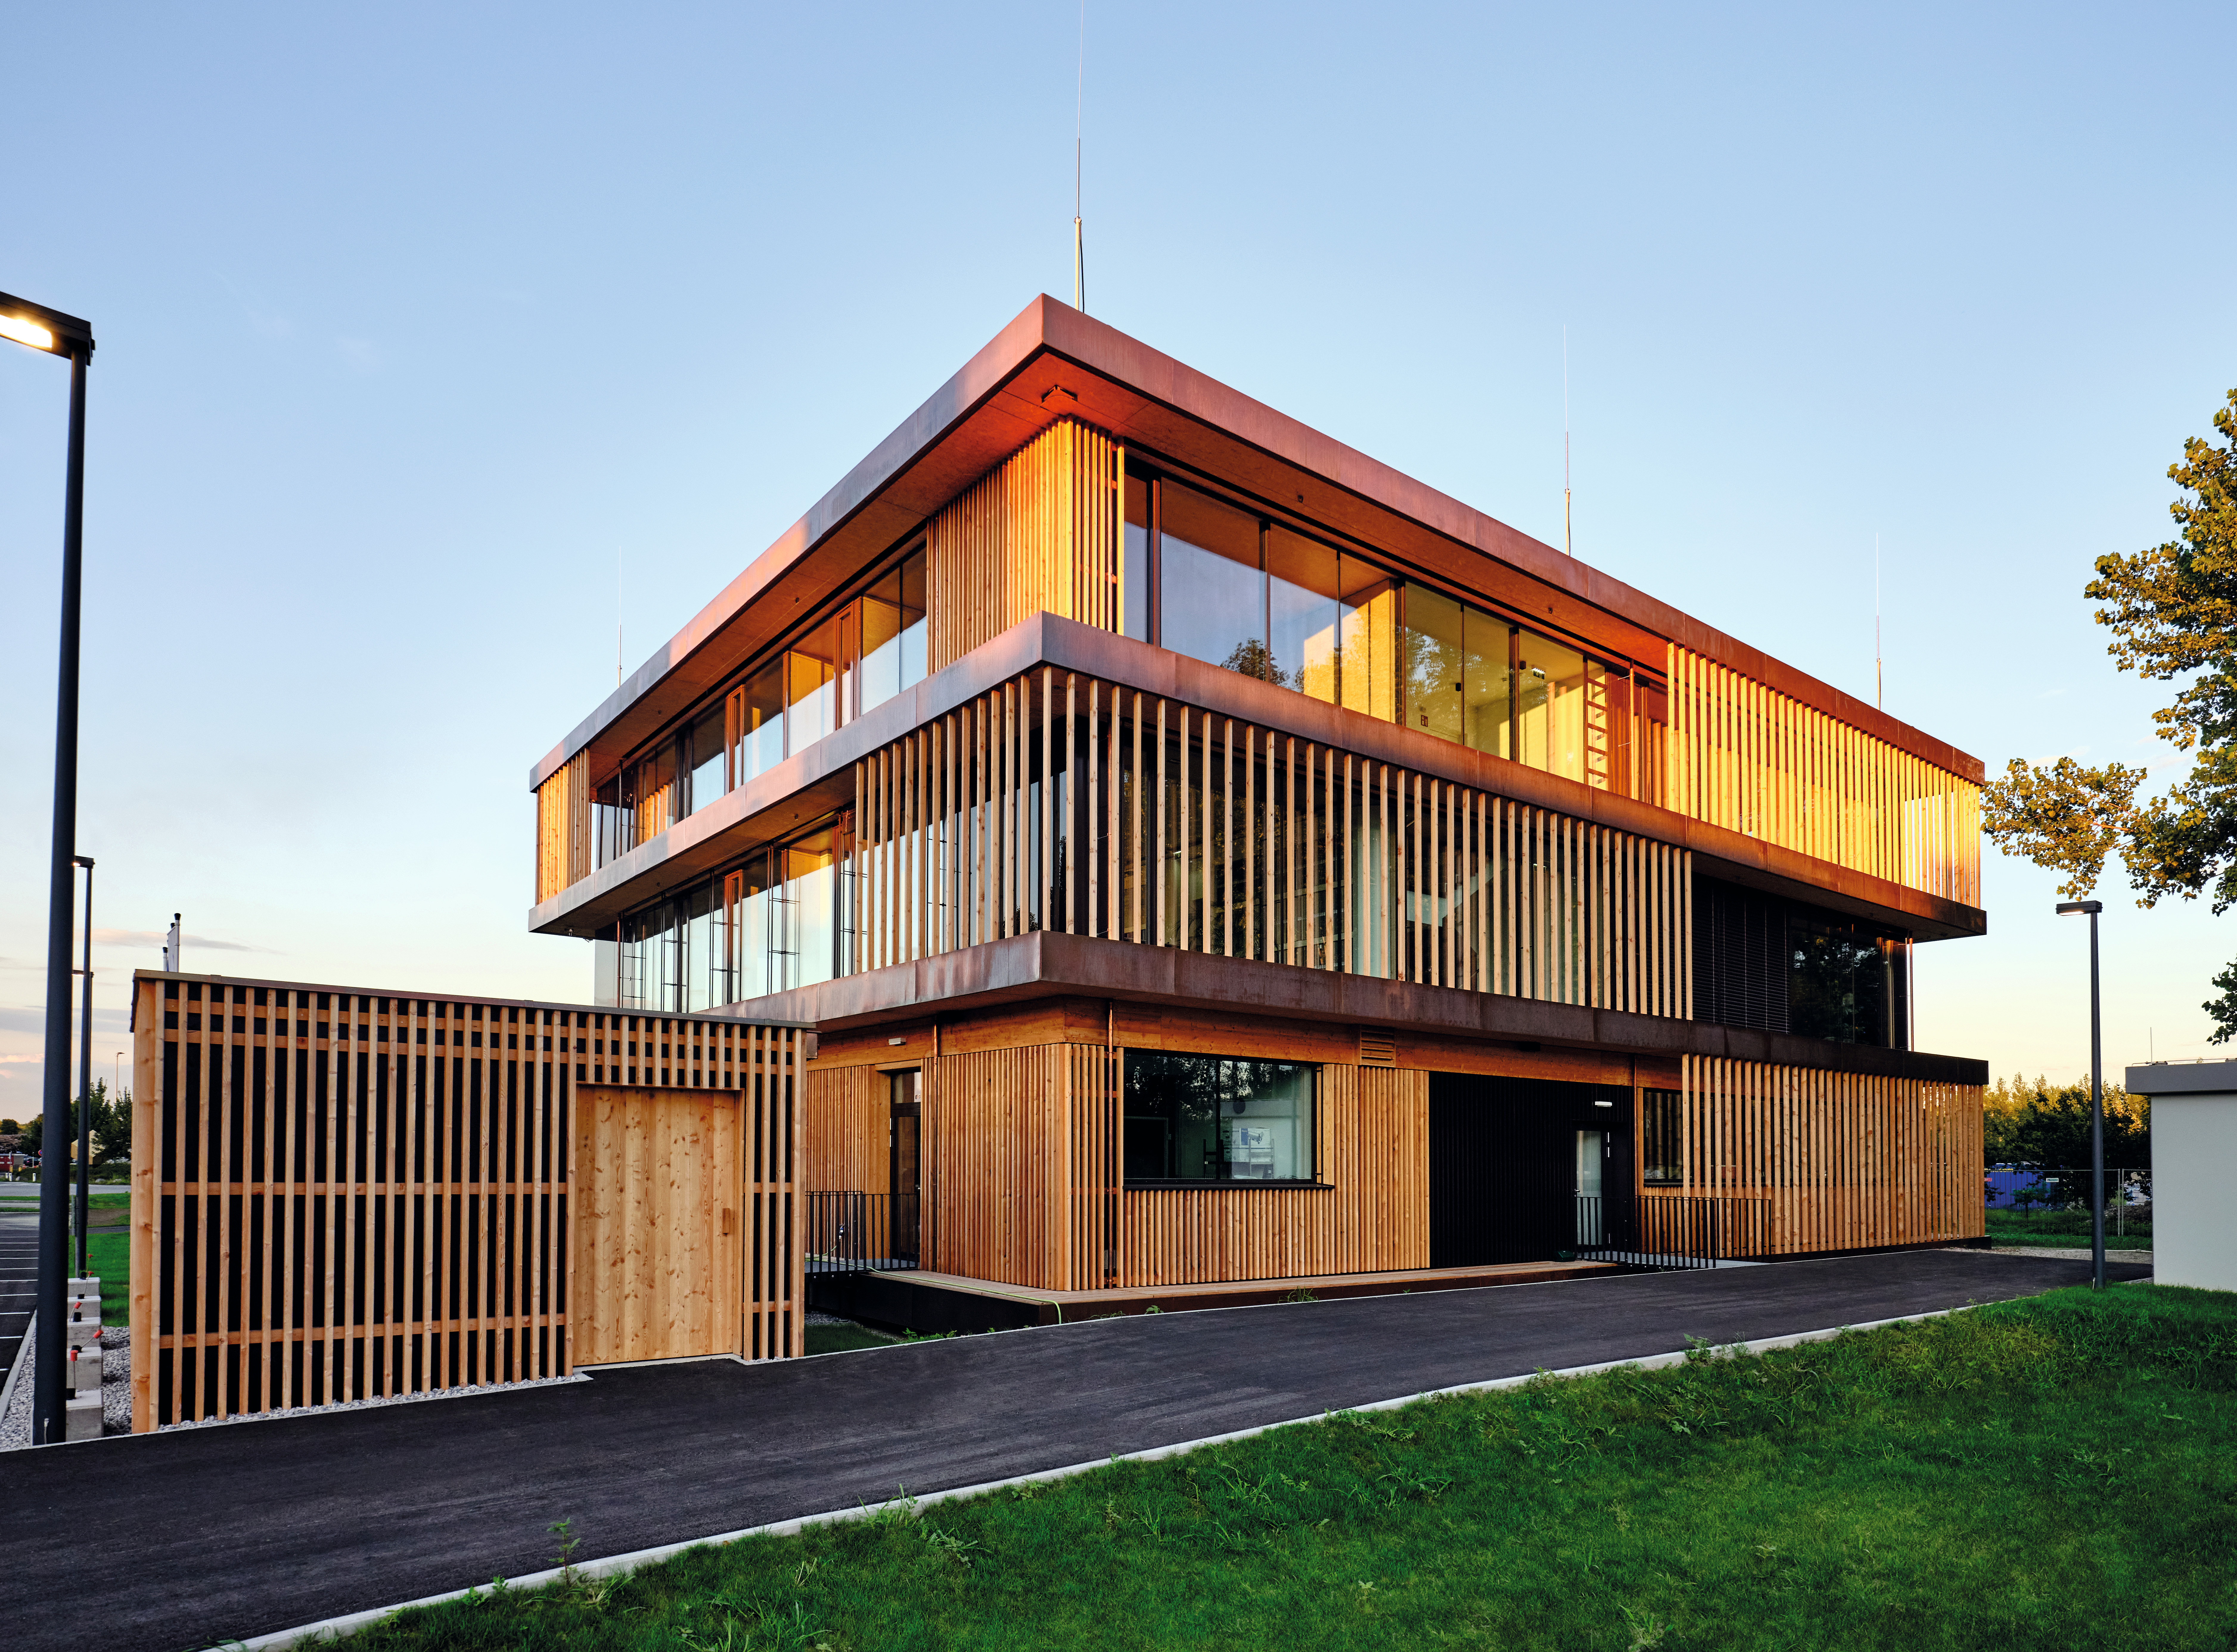 The new Forum in Unterradlberg is the fifth in the series of modularly designed company buildings.